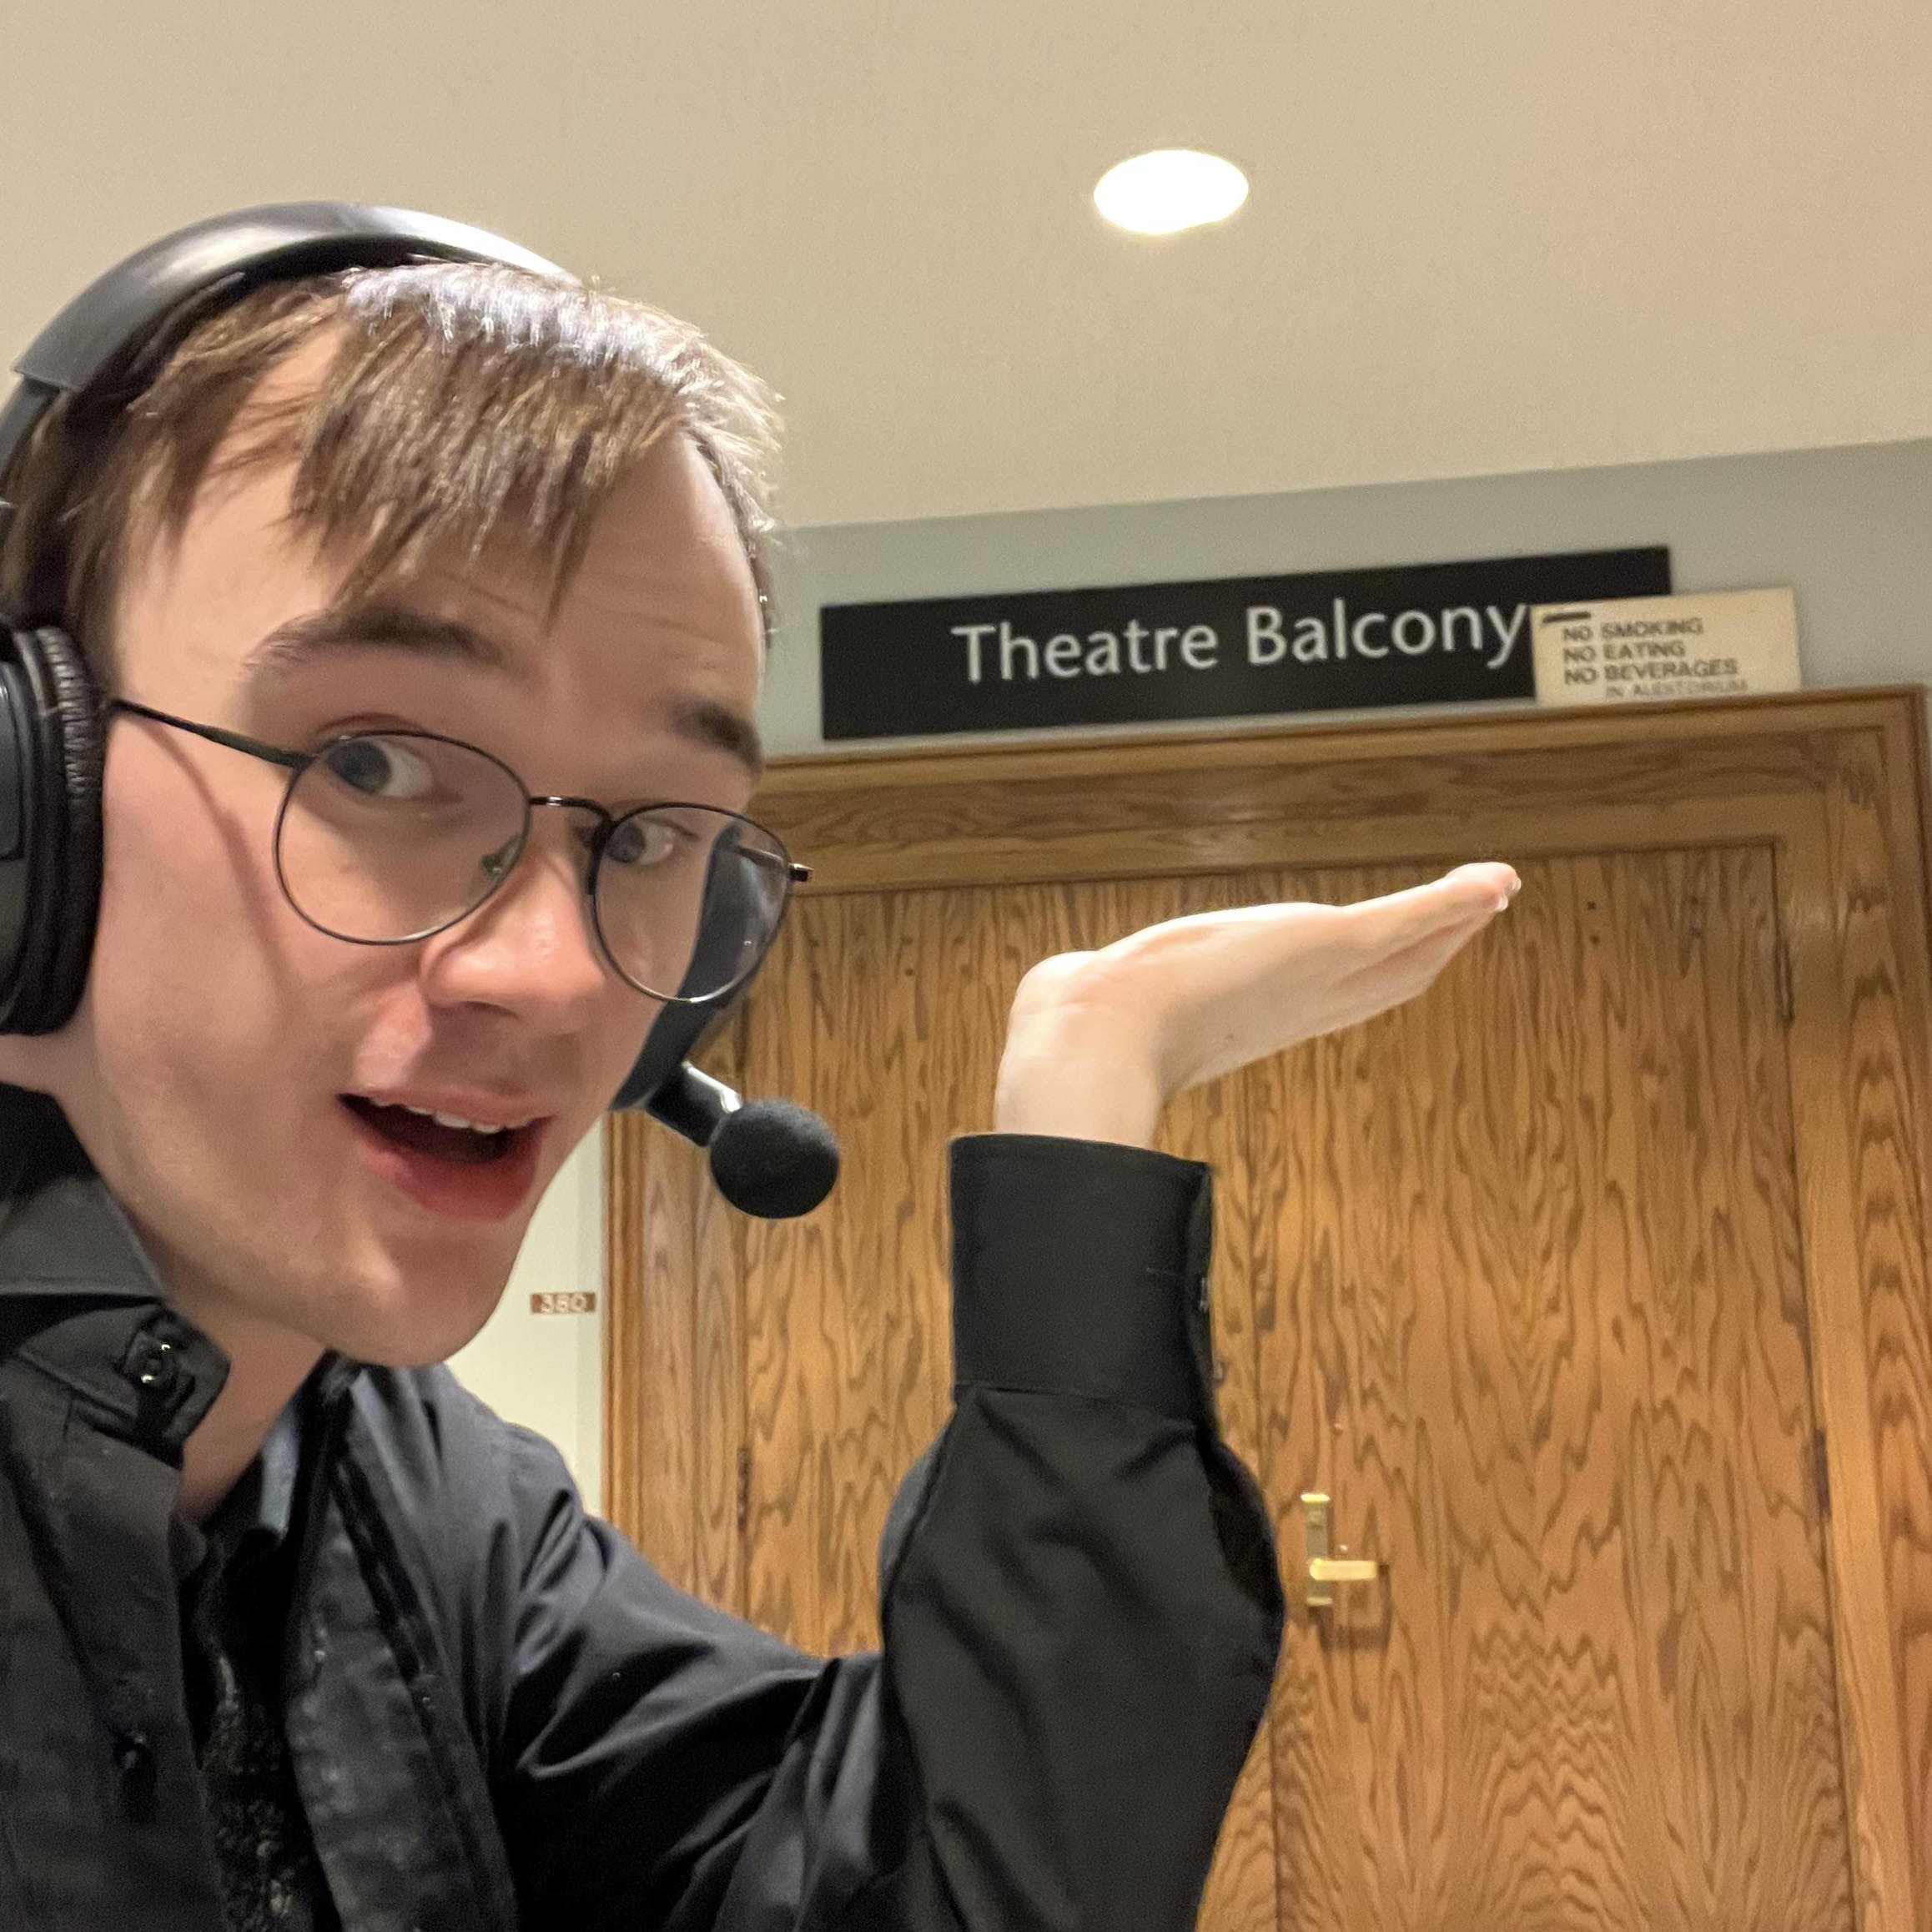 Sam is a theatre stage tech as a campus job